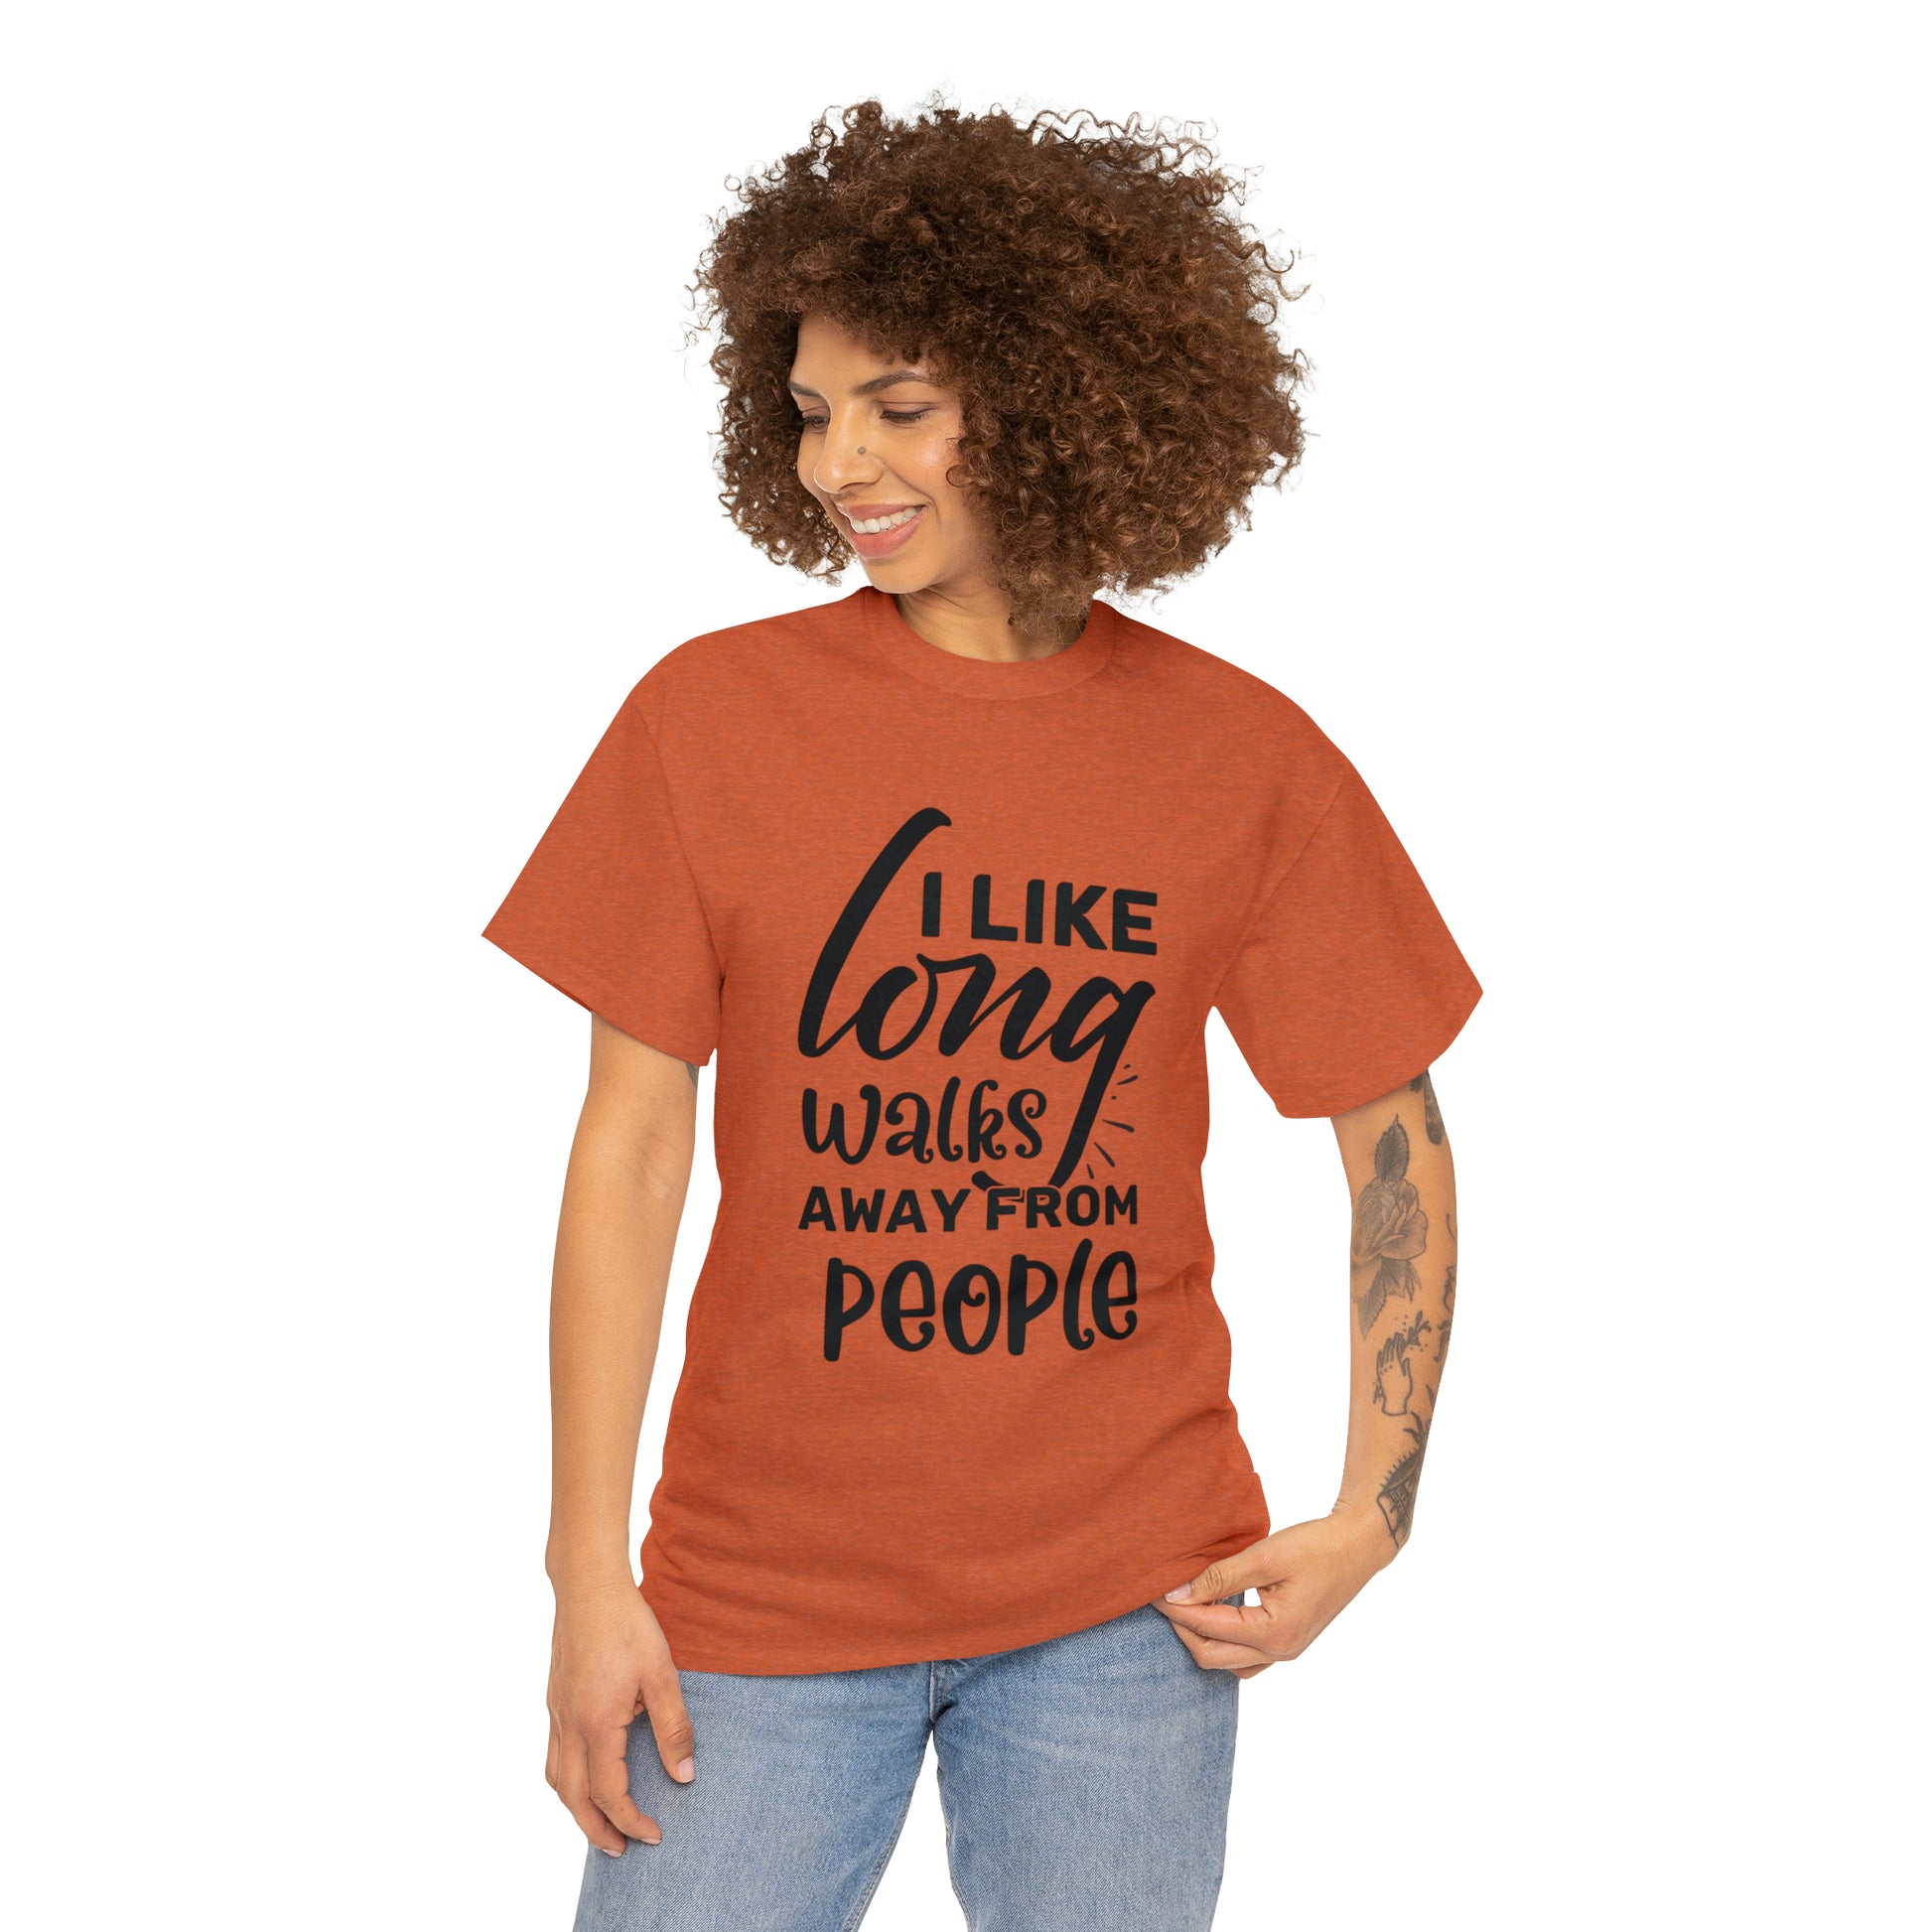 "I Like Long Walks Away From People" T-Shirt - Weave Got Gifts - Unique Gifts You Won’t Find Anywhere Else!